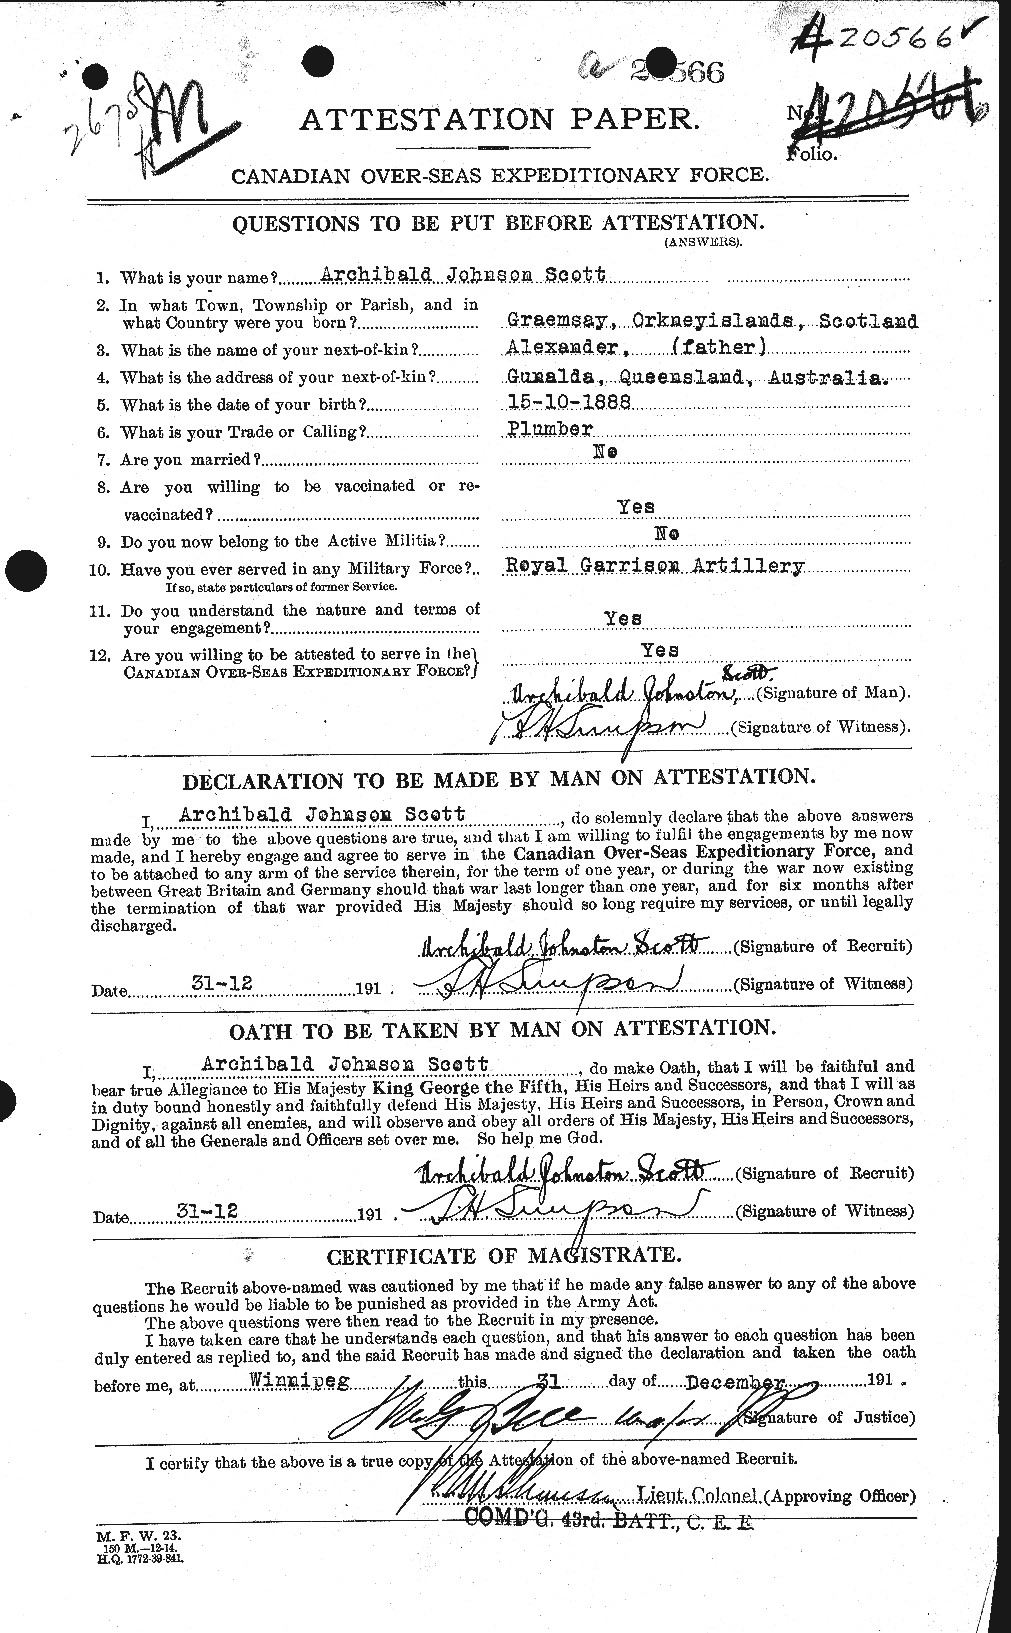 Personnel Records of the First World War - CEF 086427a